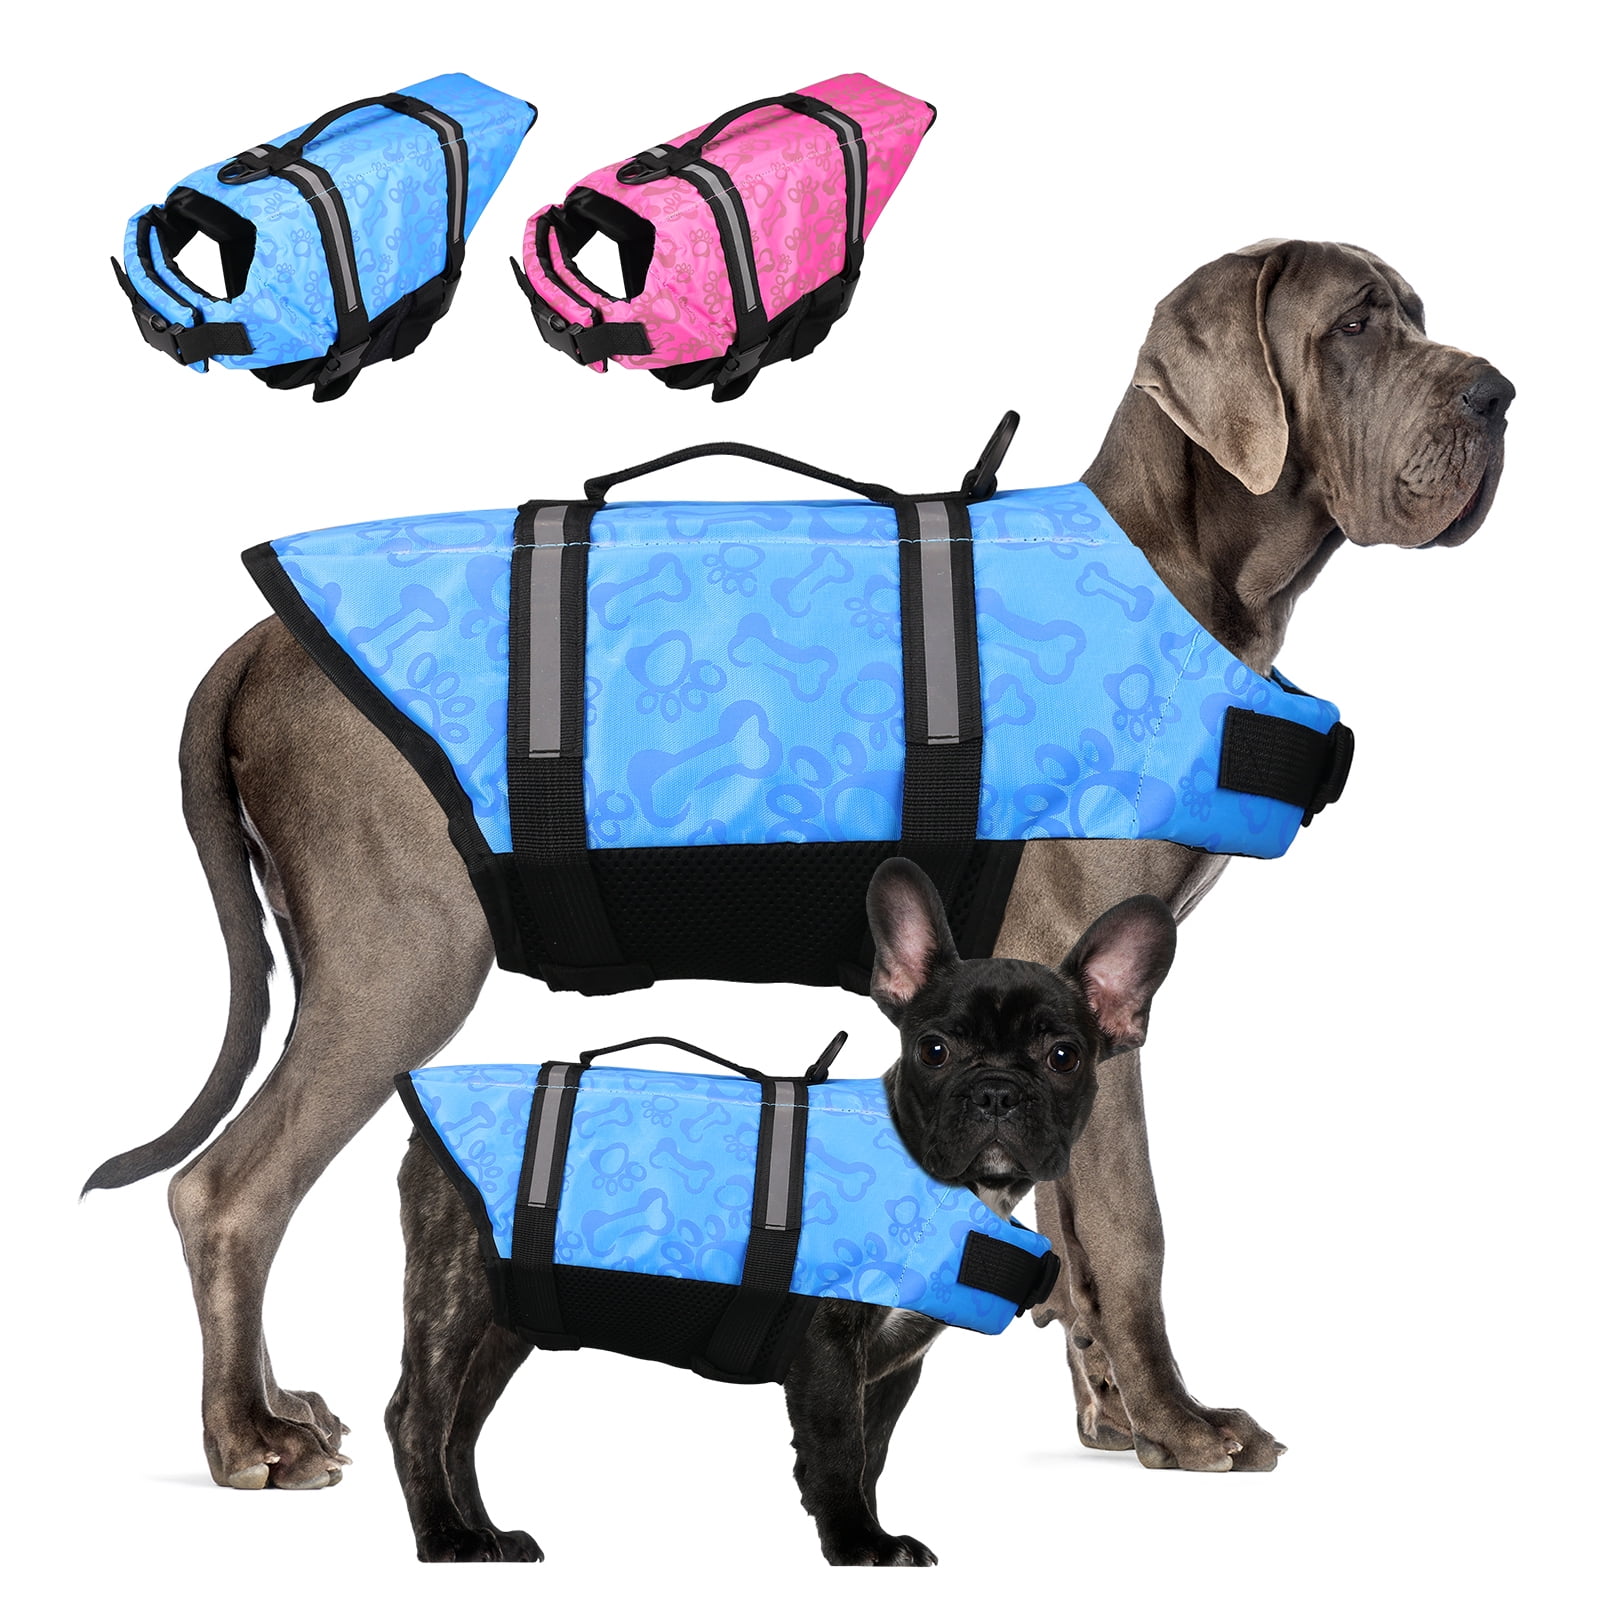 NEWEEN Dog Life Jackets Dog Life Vests for Swimming Beach Boating with ...